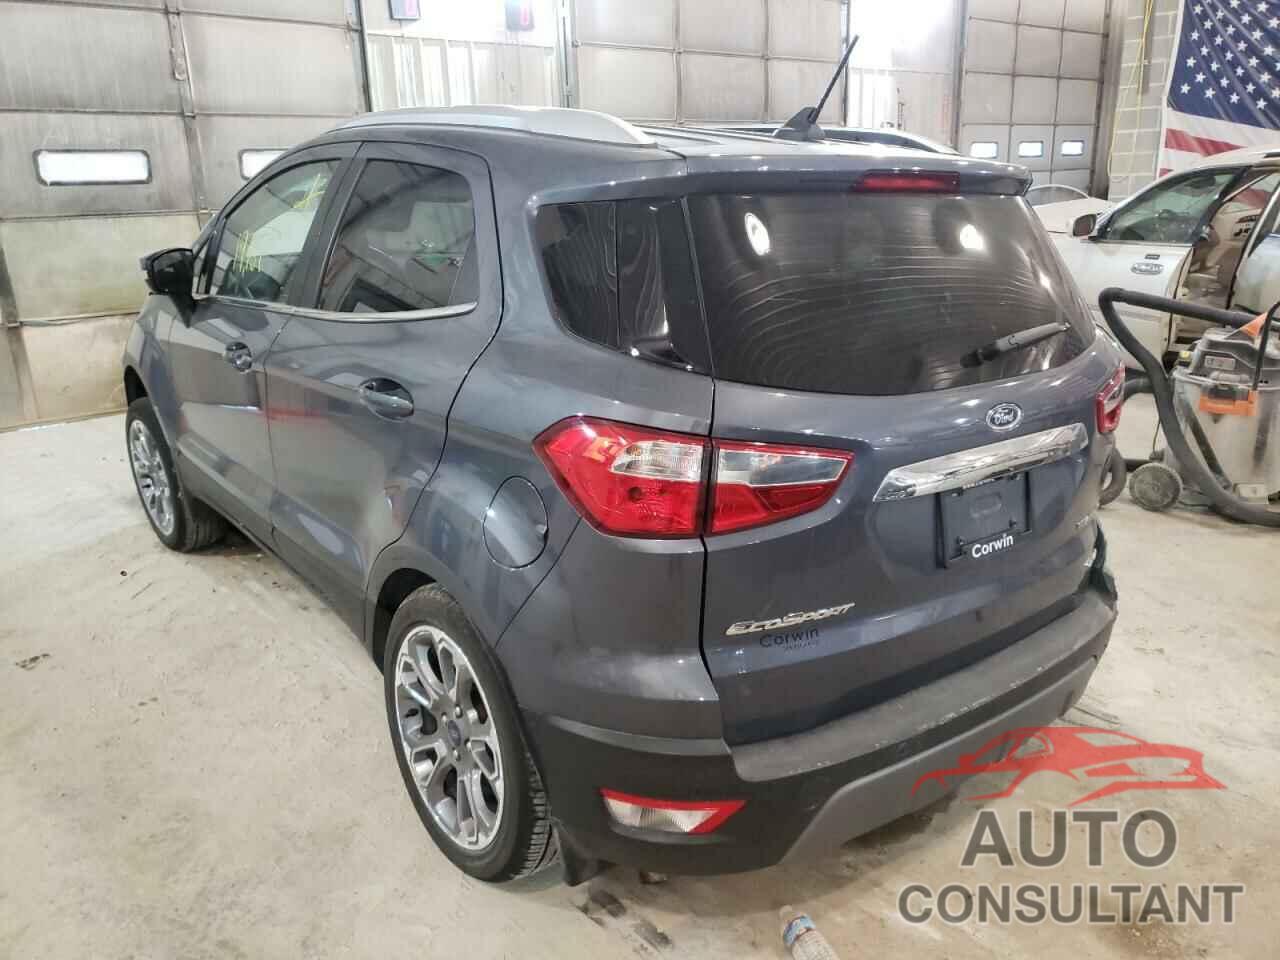 FORD ALL OTHER 2018 - MAJ6P1WL3JC249525